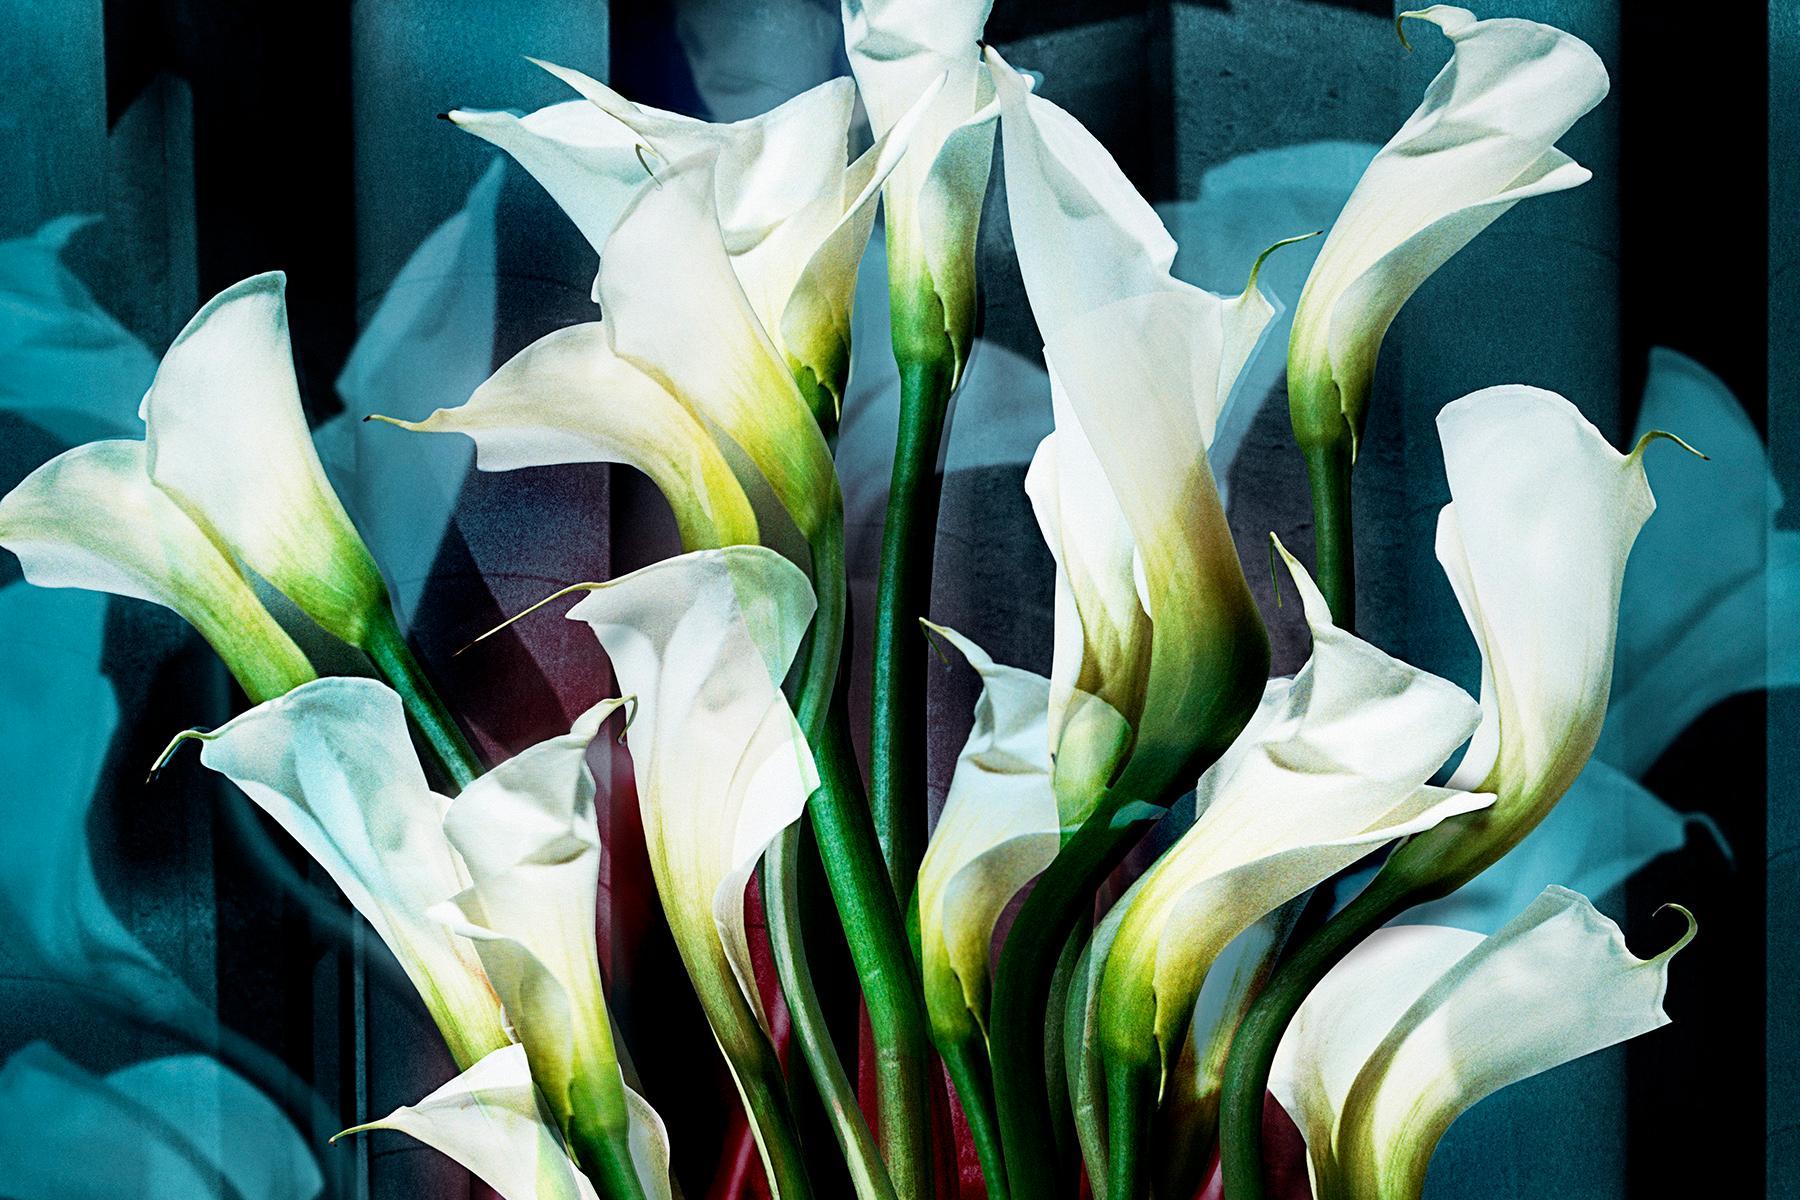 Calla Lilies • # 3 of 9 • 42 cm x 29 cm - Black Still-Life Photograph by Angelika Buettner